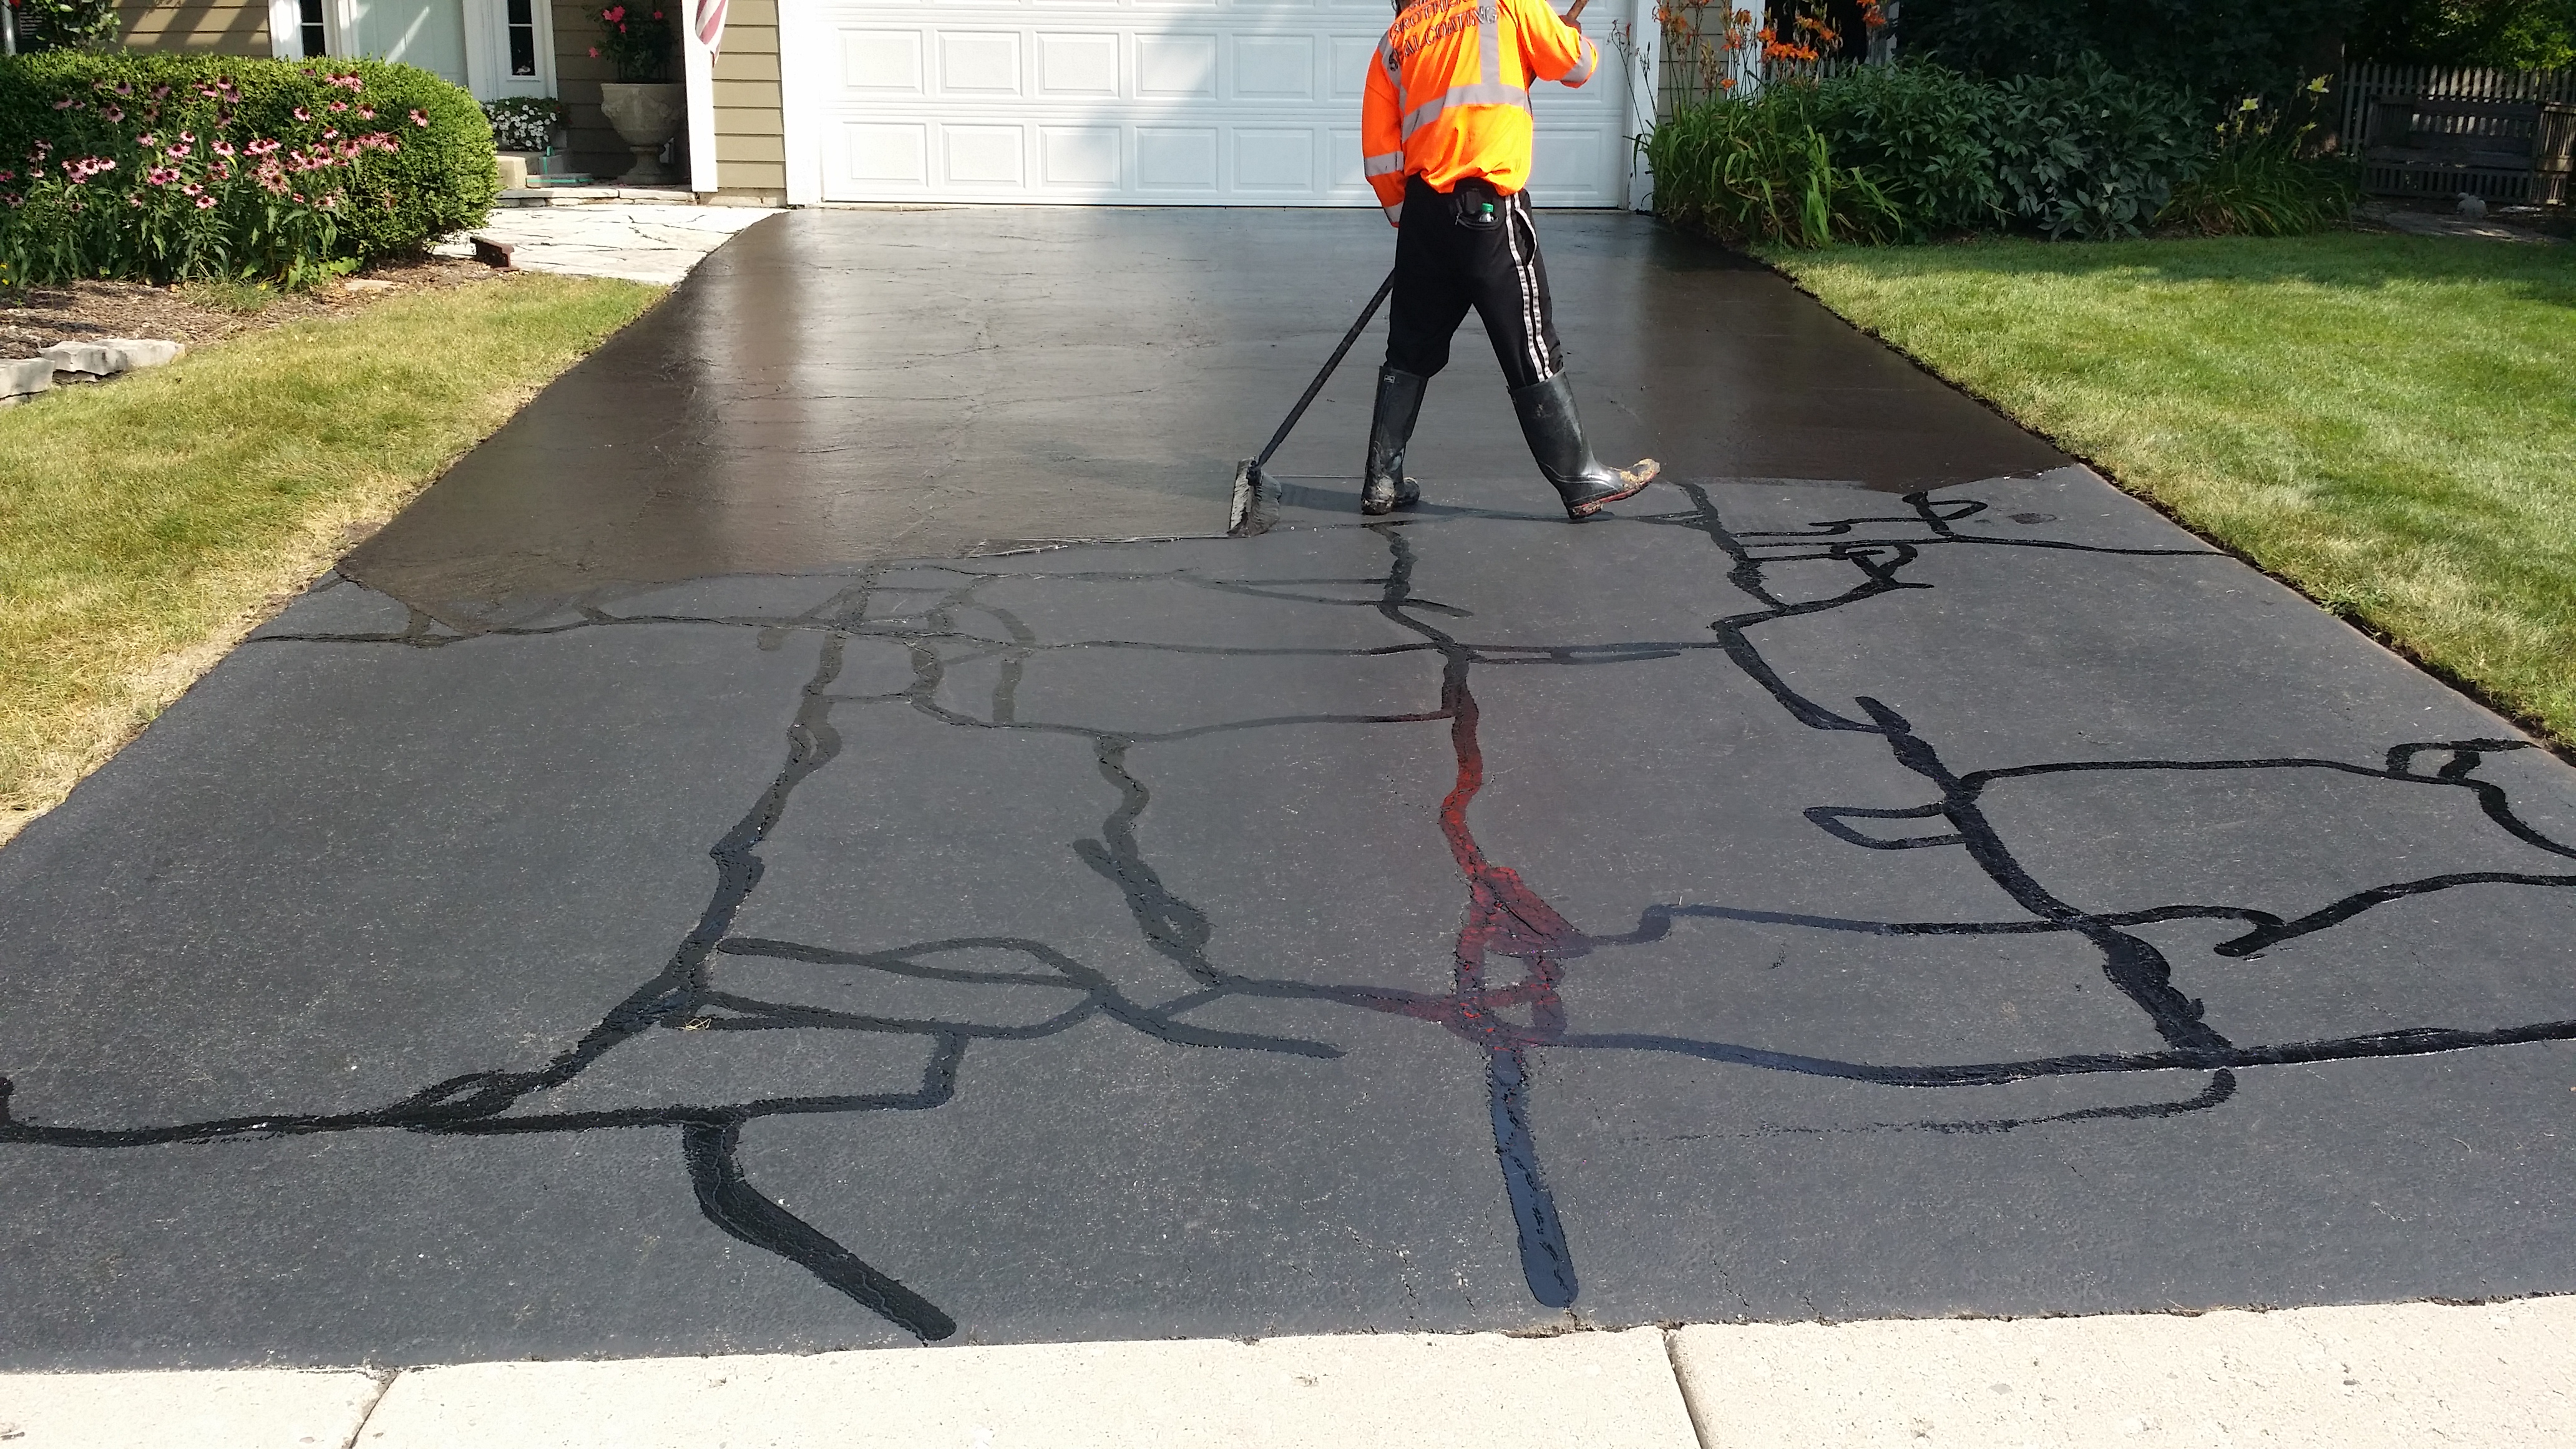 How To Fill The Cracks On Your Asphalt Driveway?